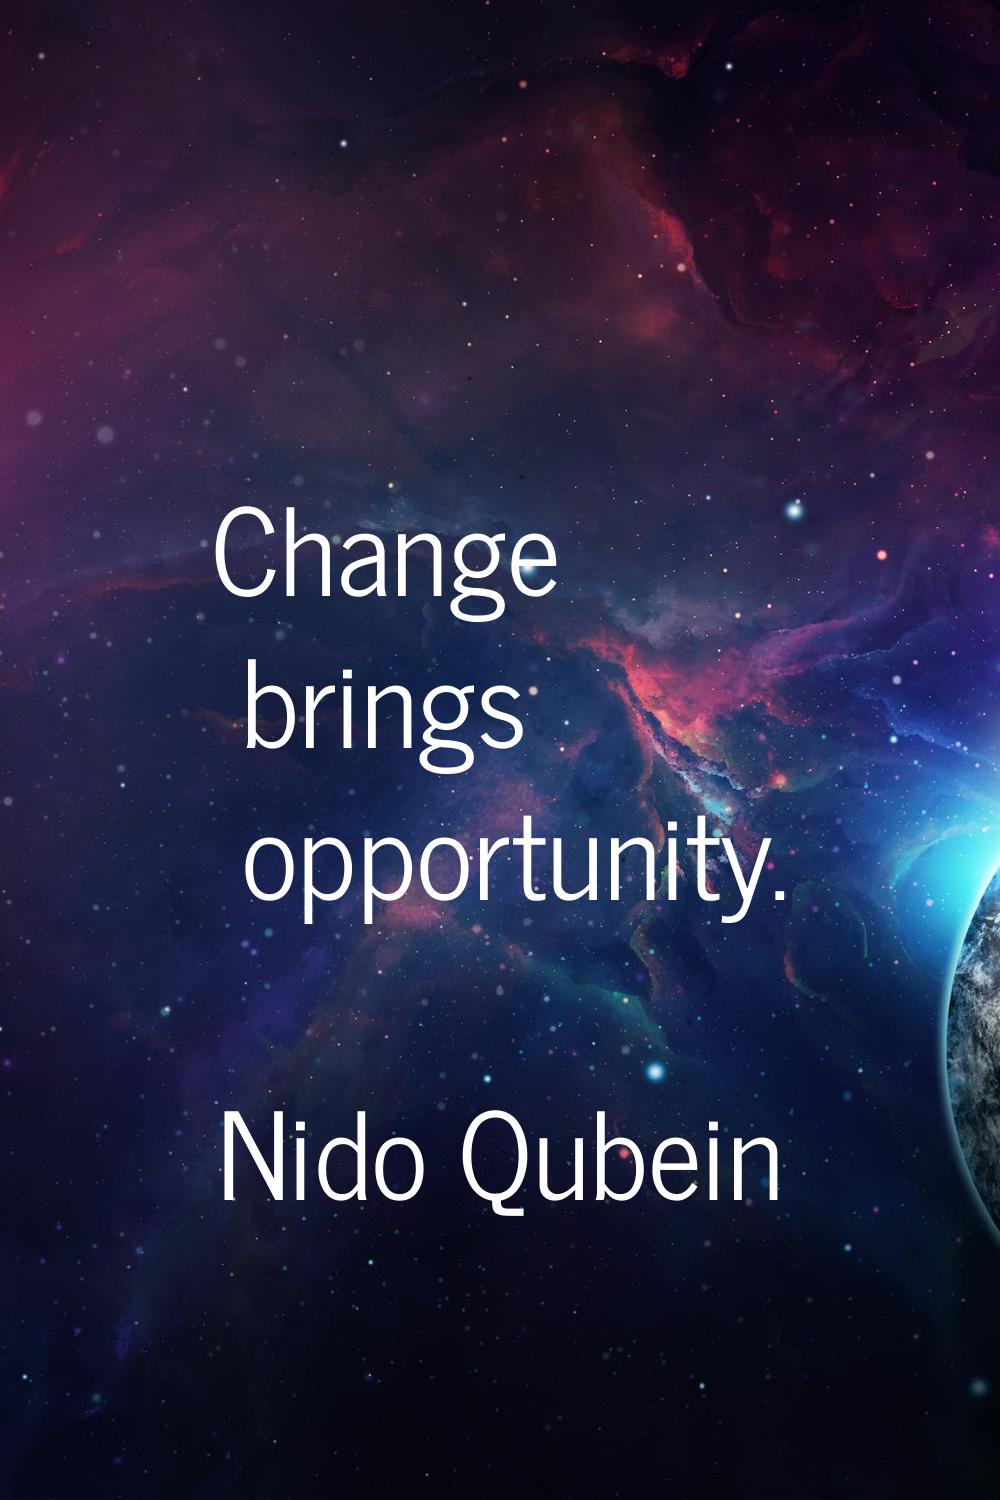 Change brings opportunity.